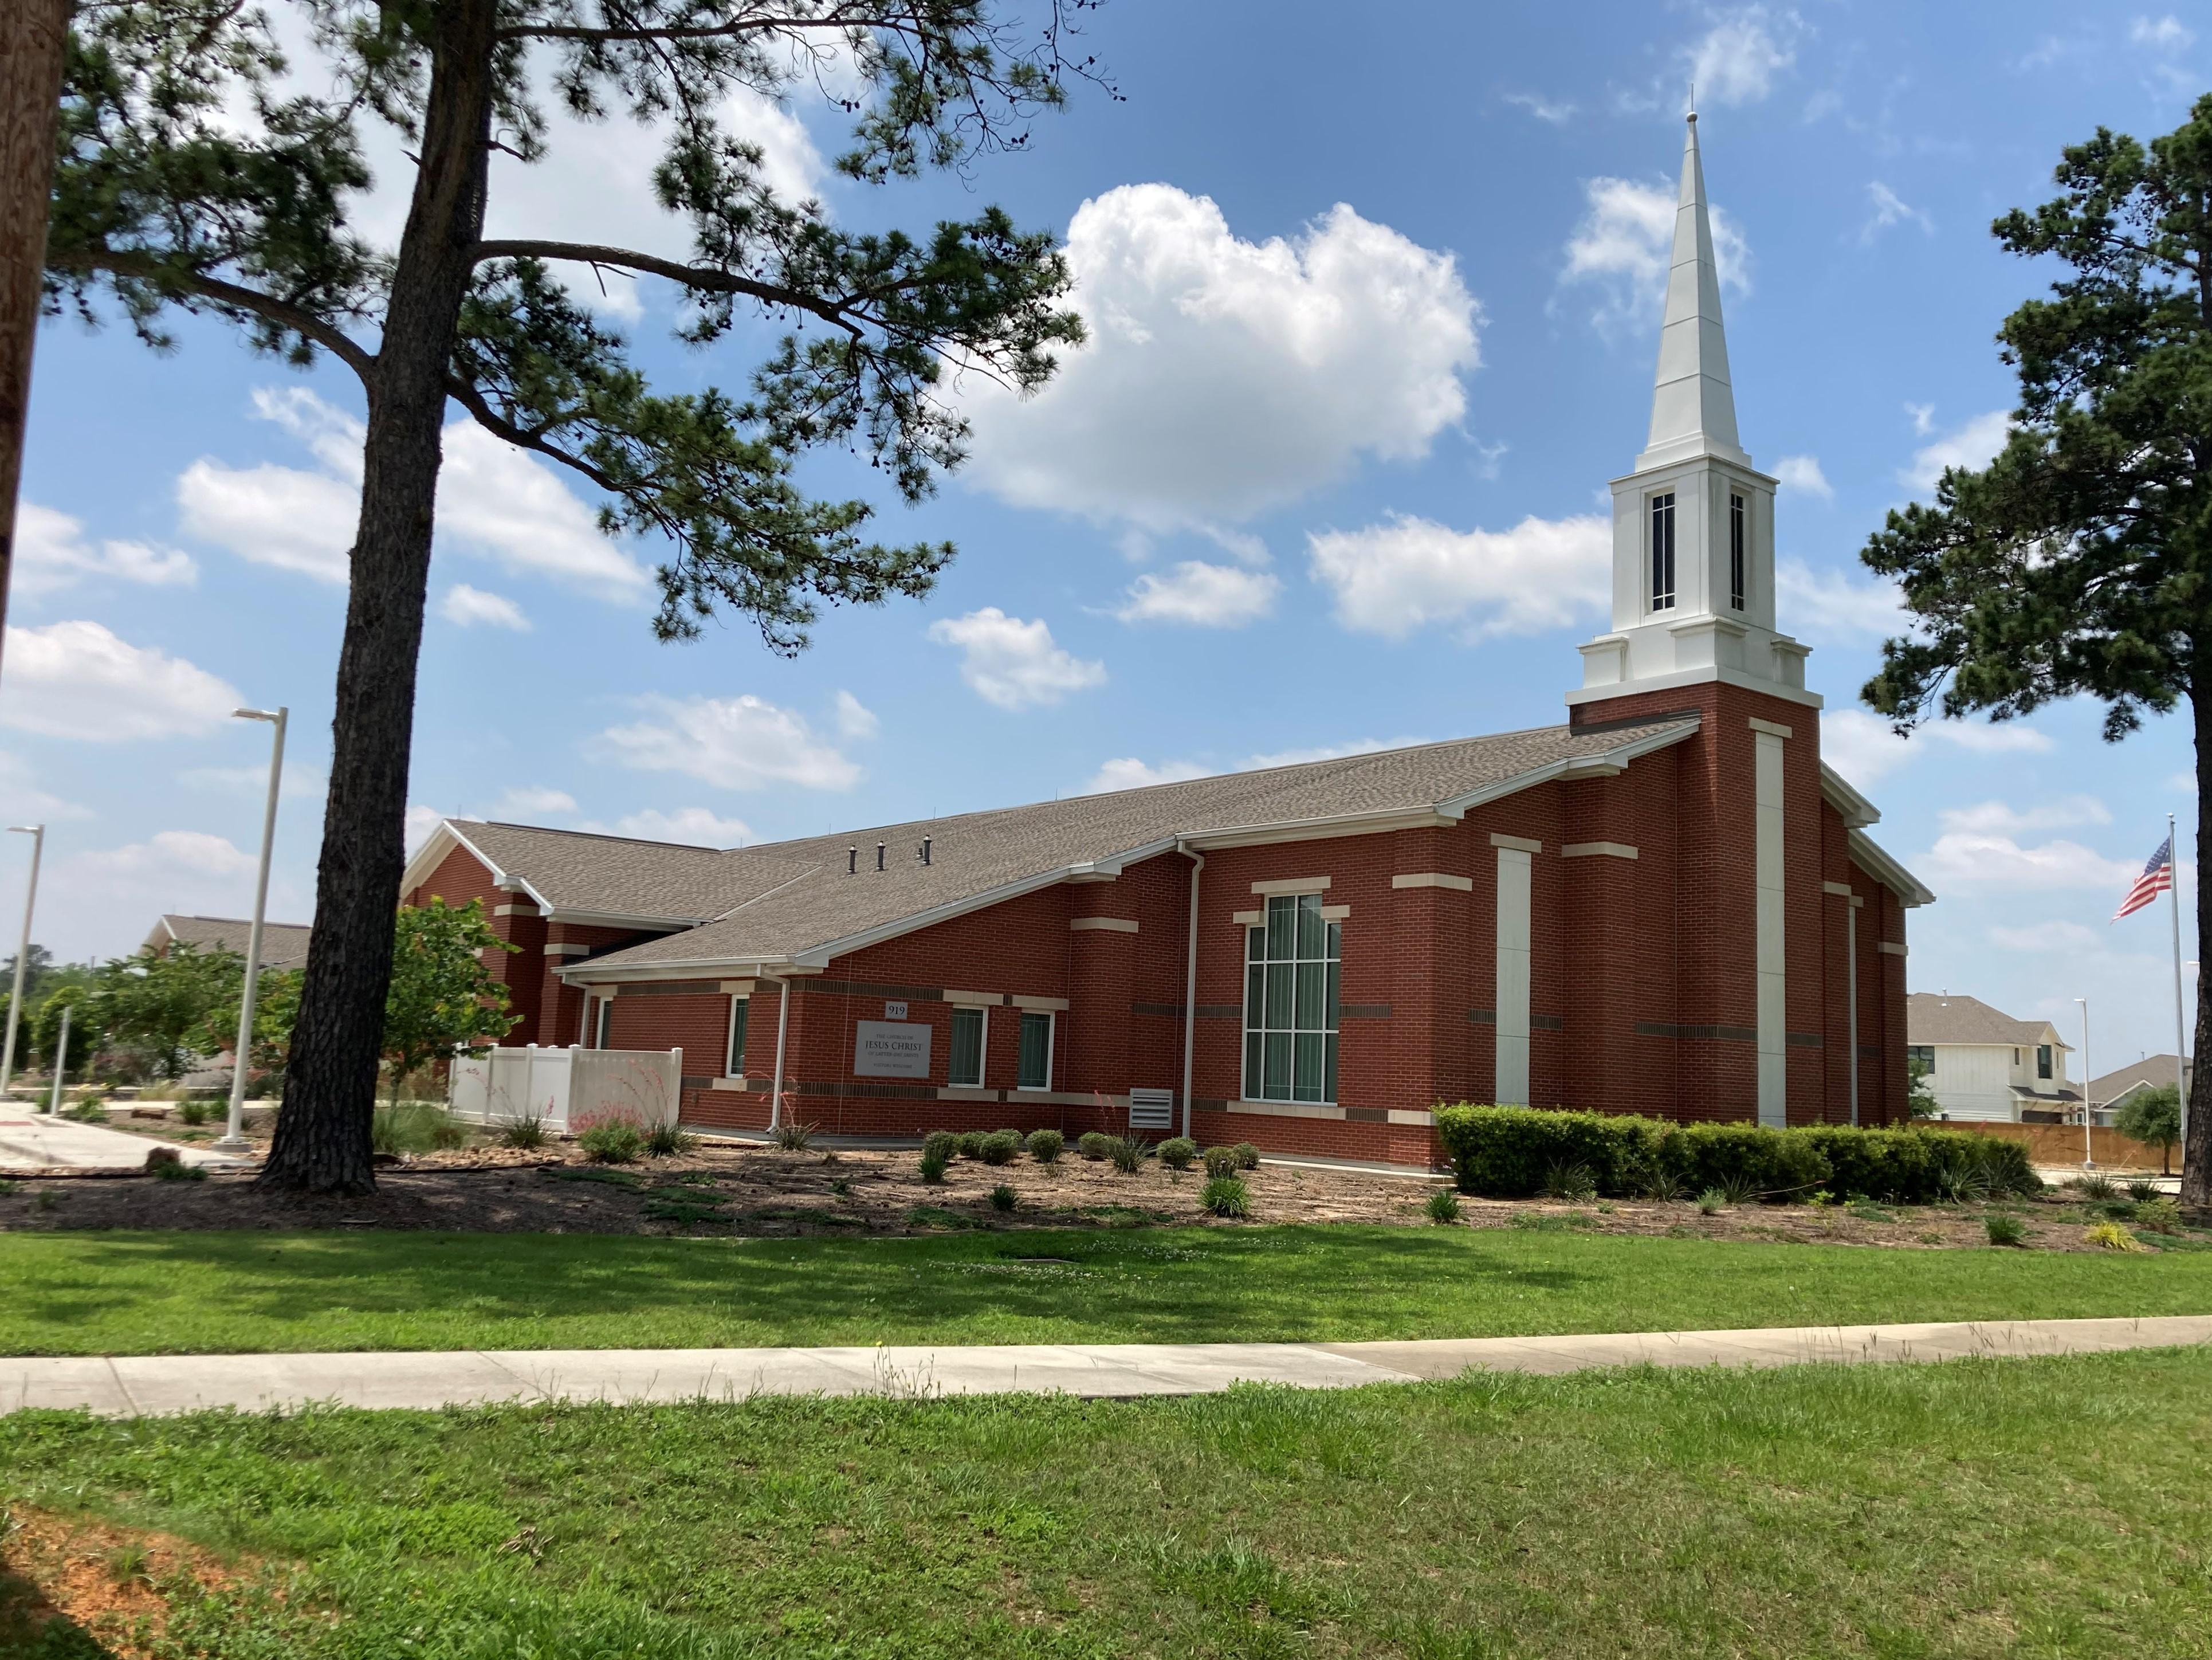 Tomball Texas Stake Center of The Church of Jesus Christ of Latter-day Saints located at 919 Brown Road in Tomball Texas.